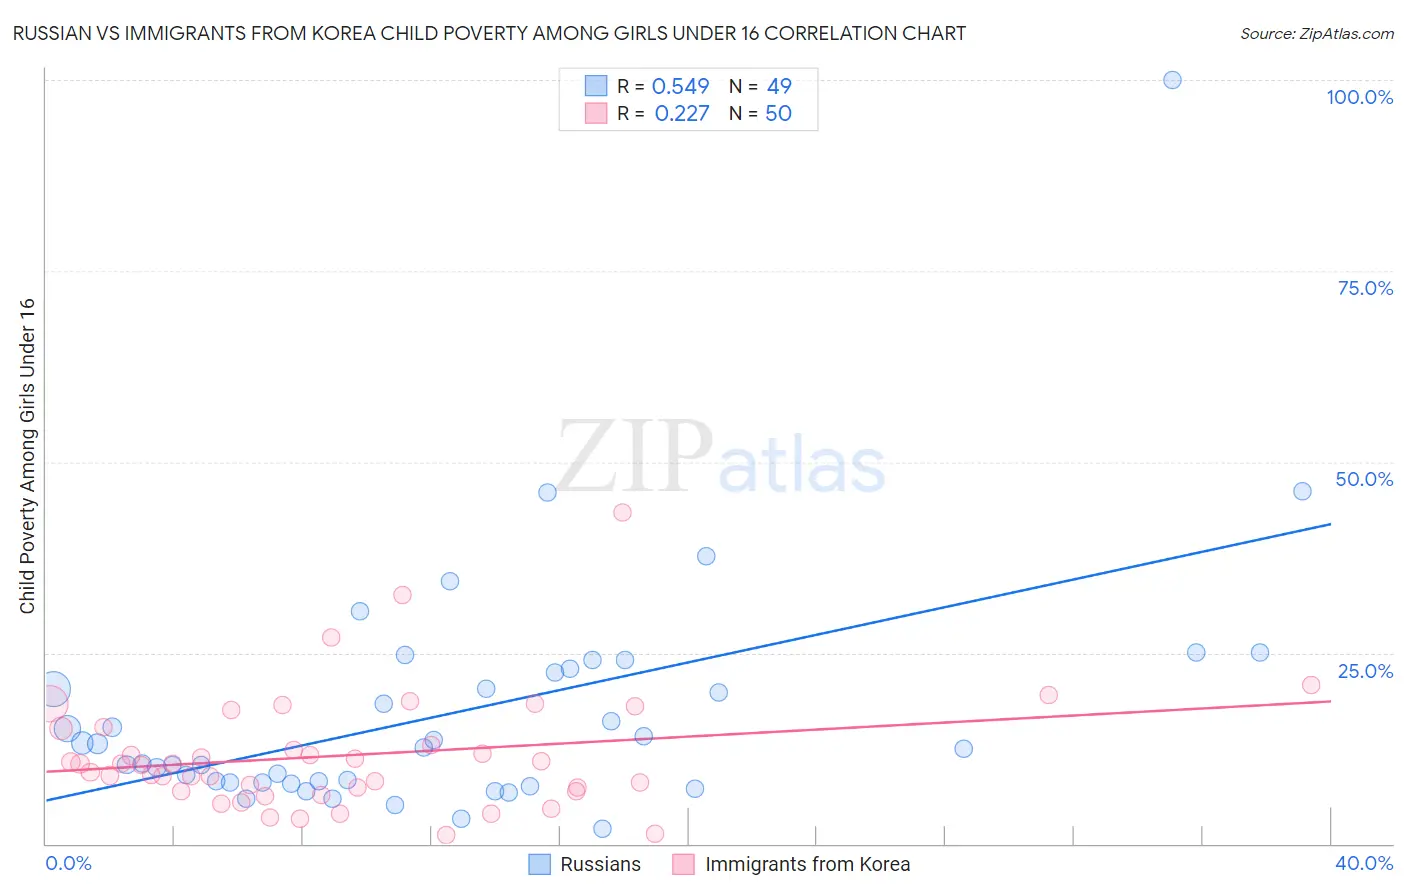 Russian vs Immigrants from Korea Child Poverty Among Girls Under 16